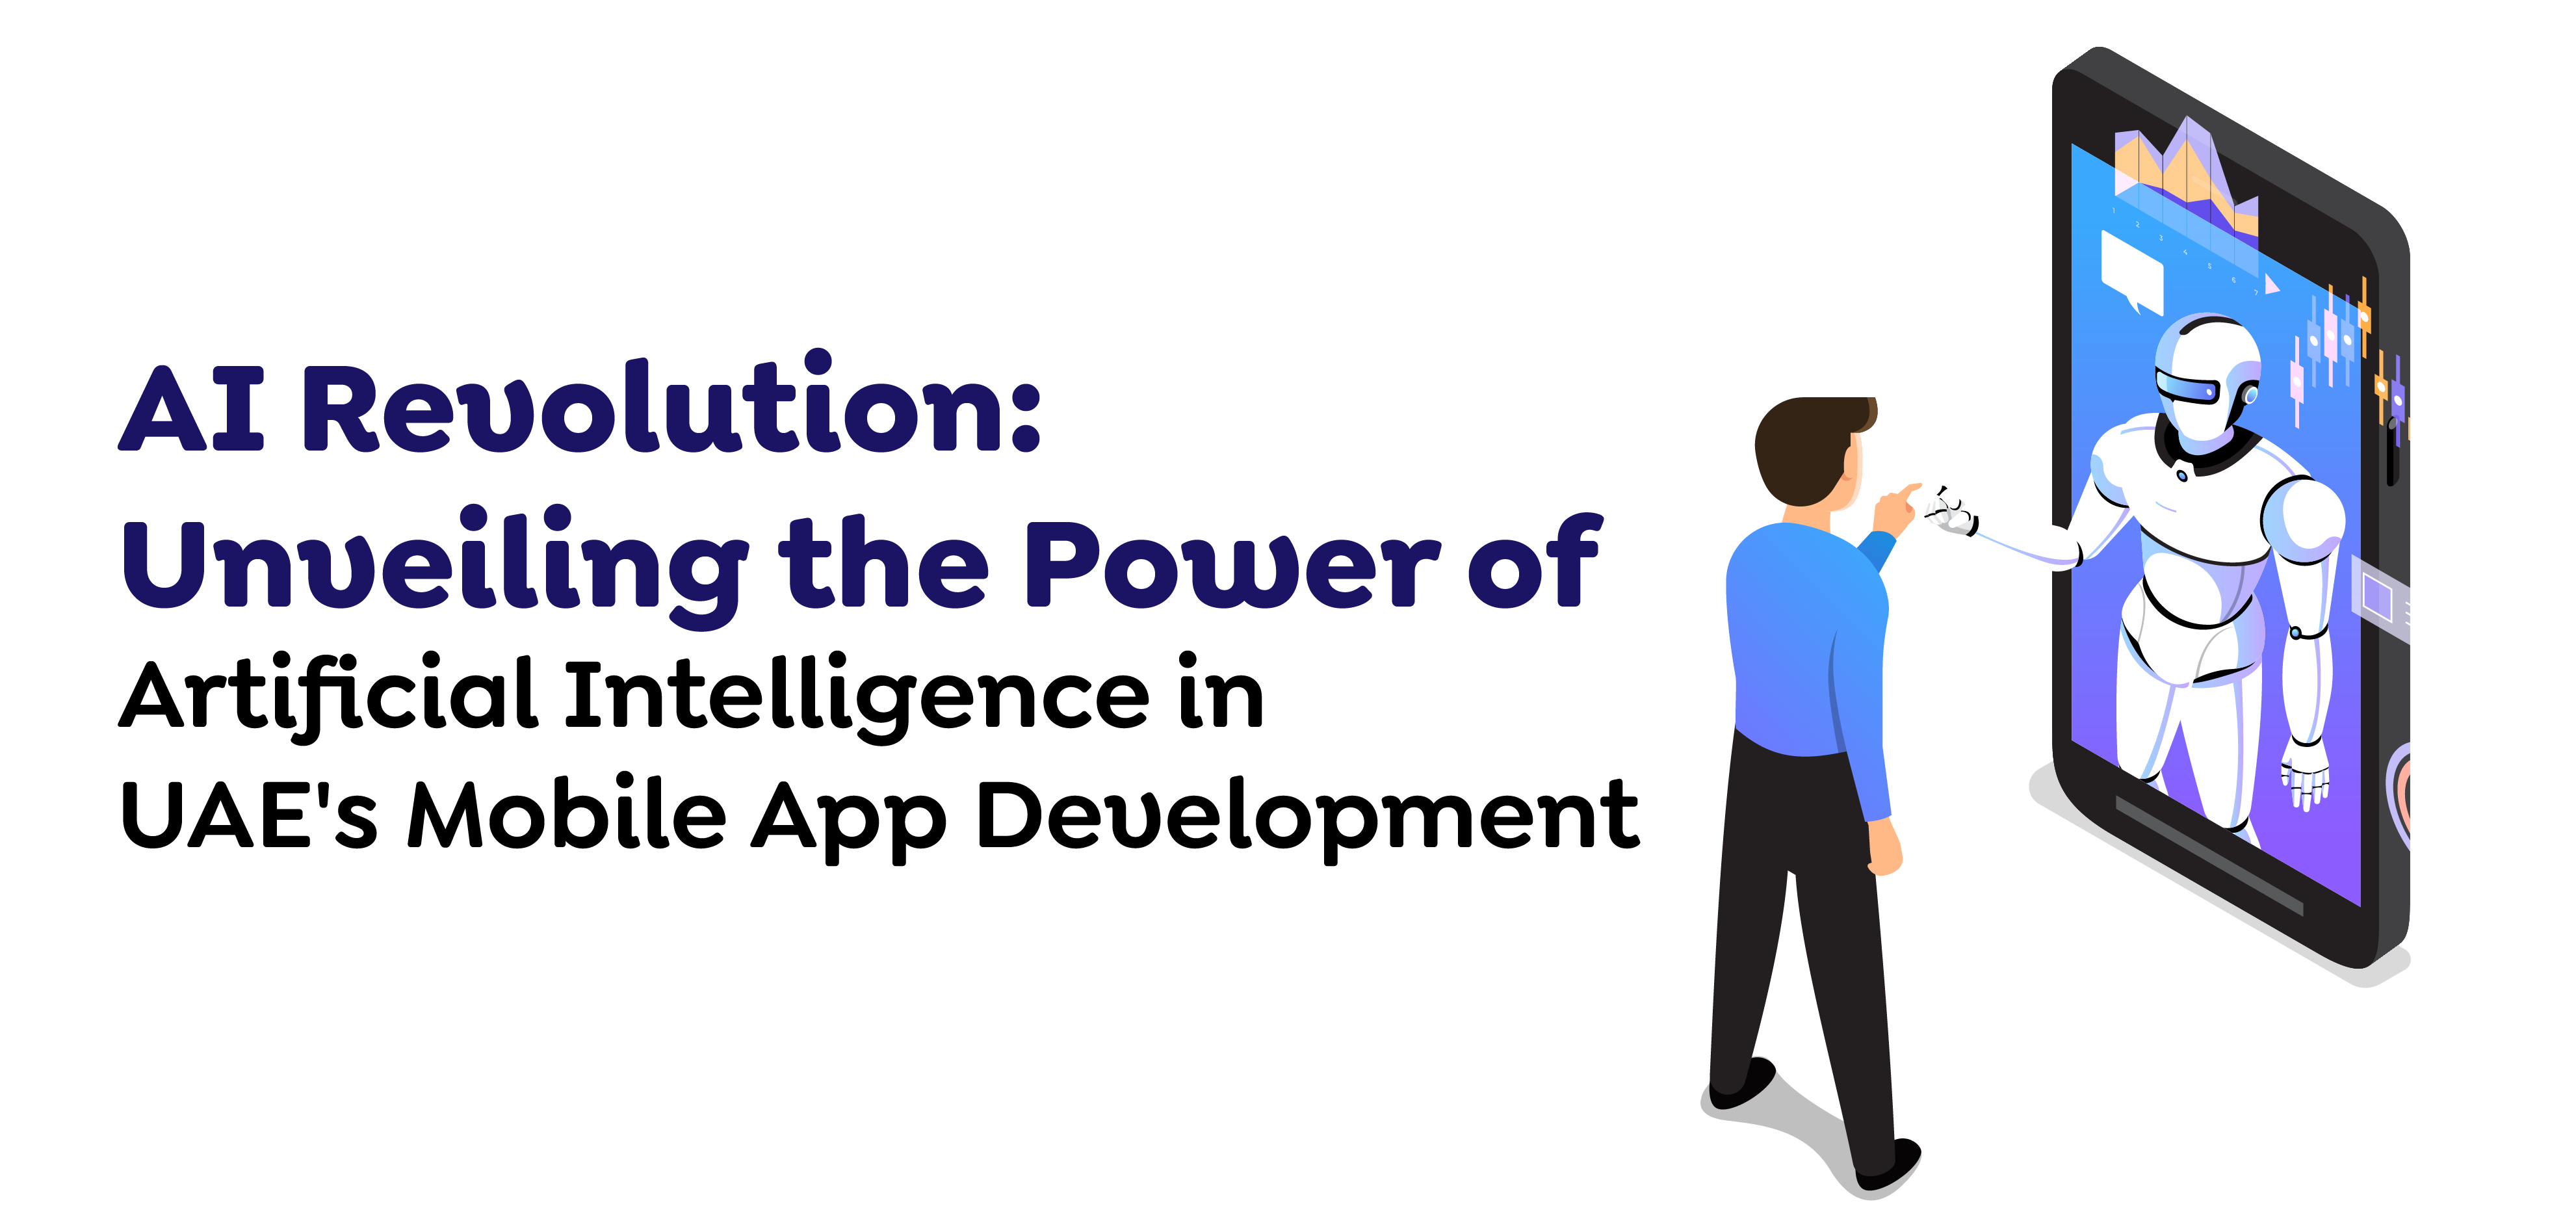 AI Revolution- Unveiling the Power of Artificial Intelligence in UAE's Mobile App Development